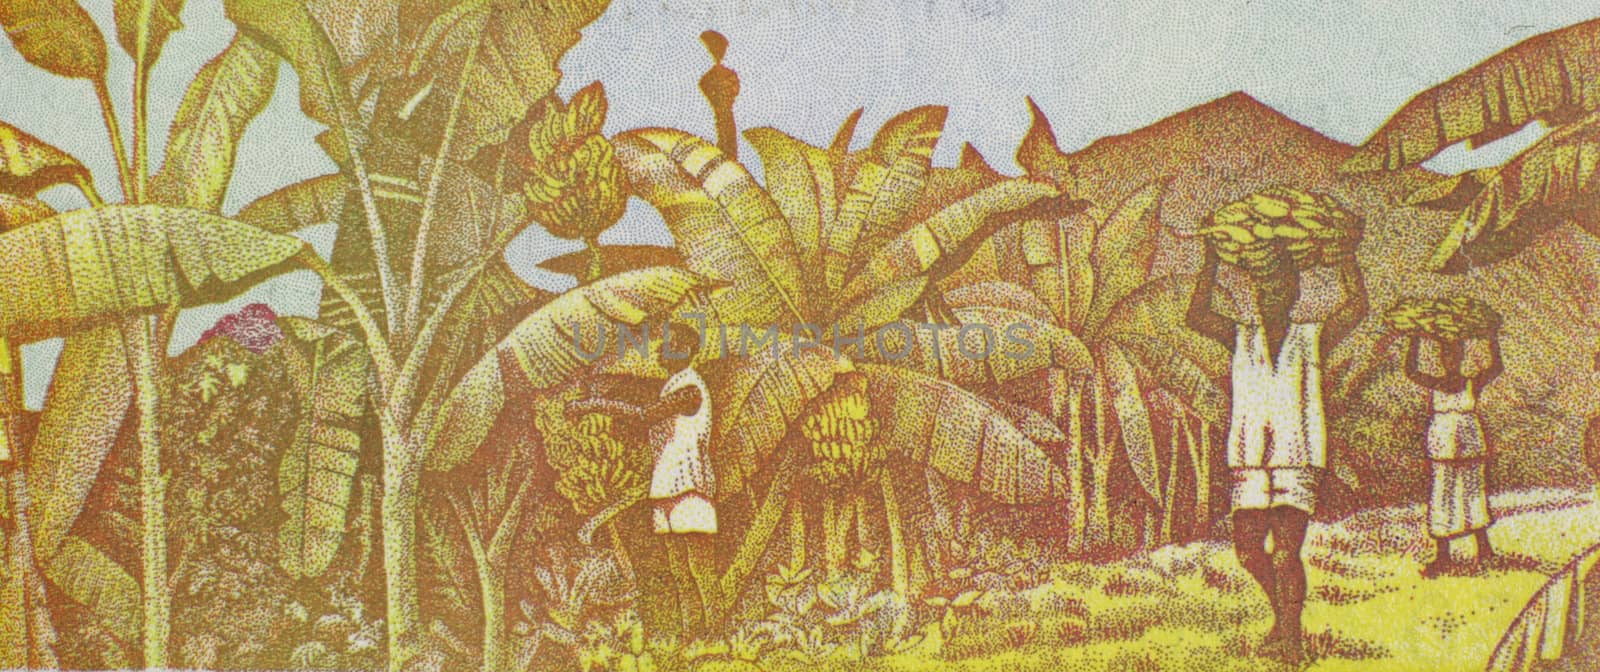 Harvesting Bananas on 100 Francs 1998 Banknote from Guinea.